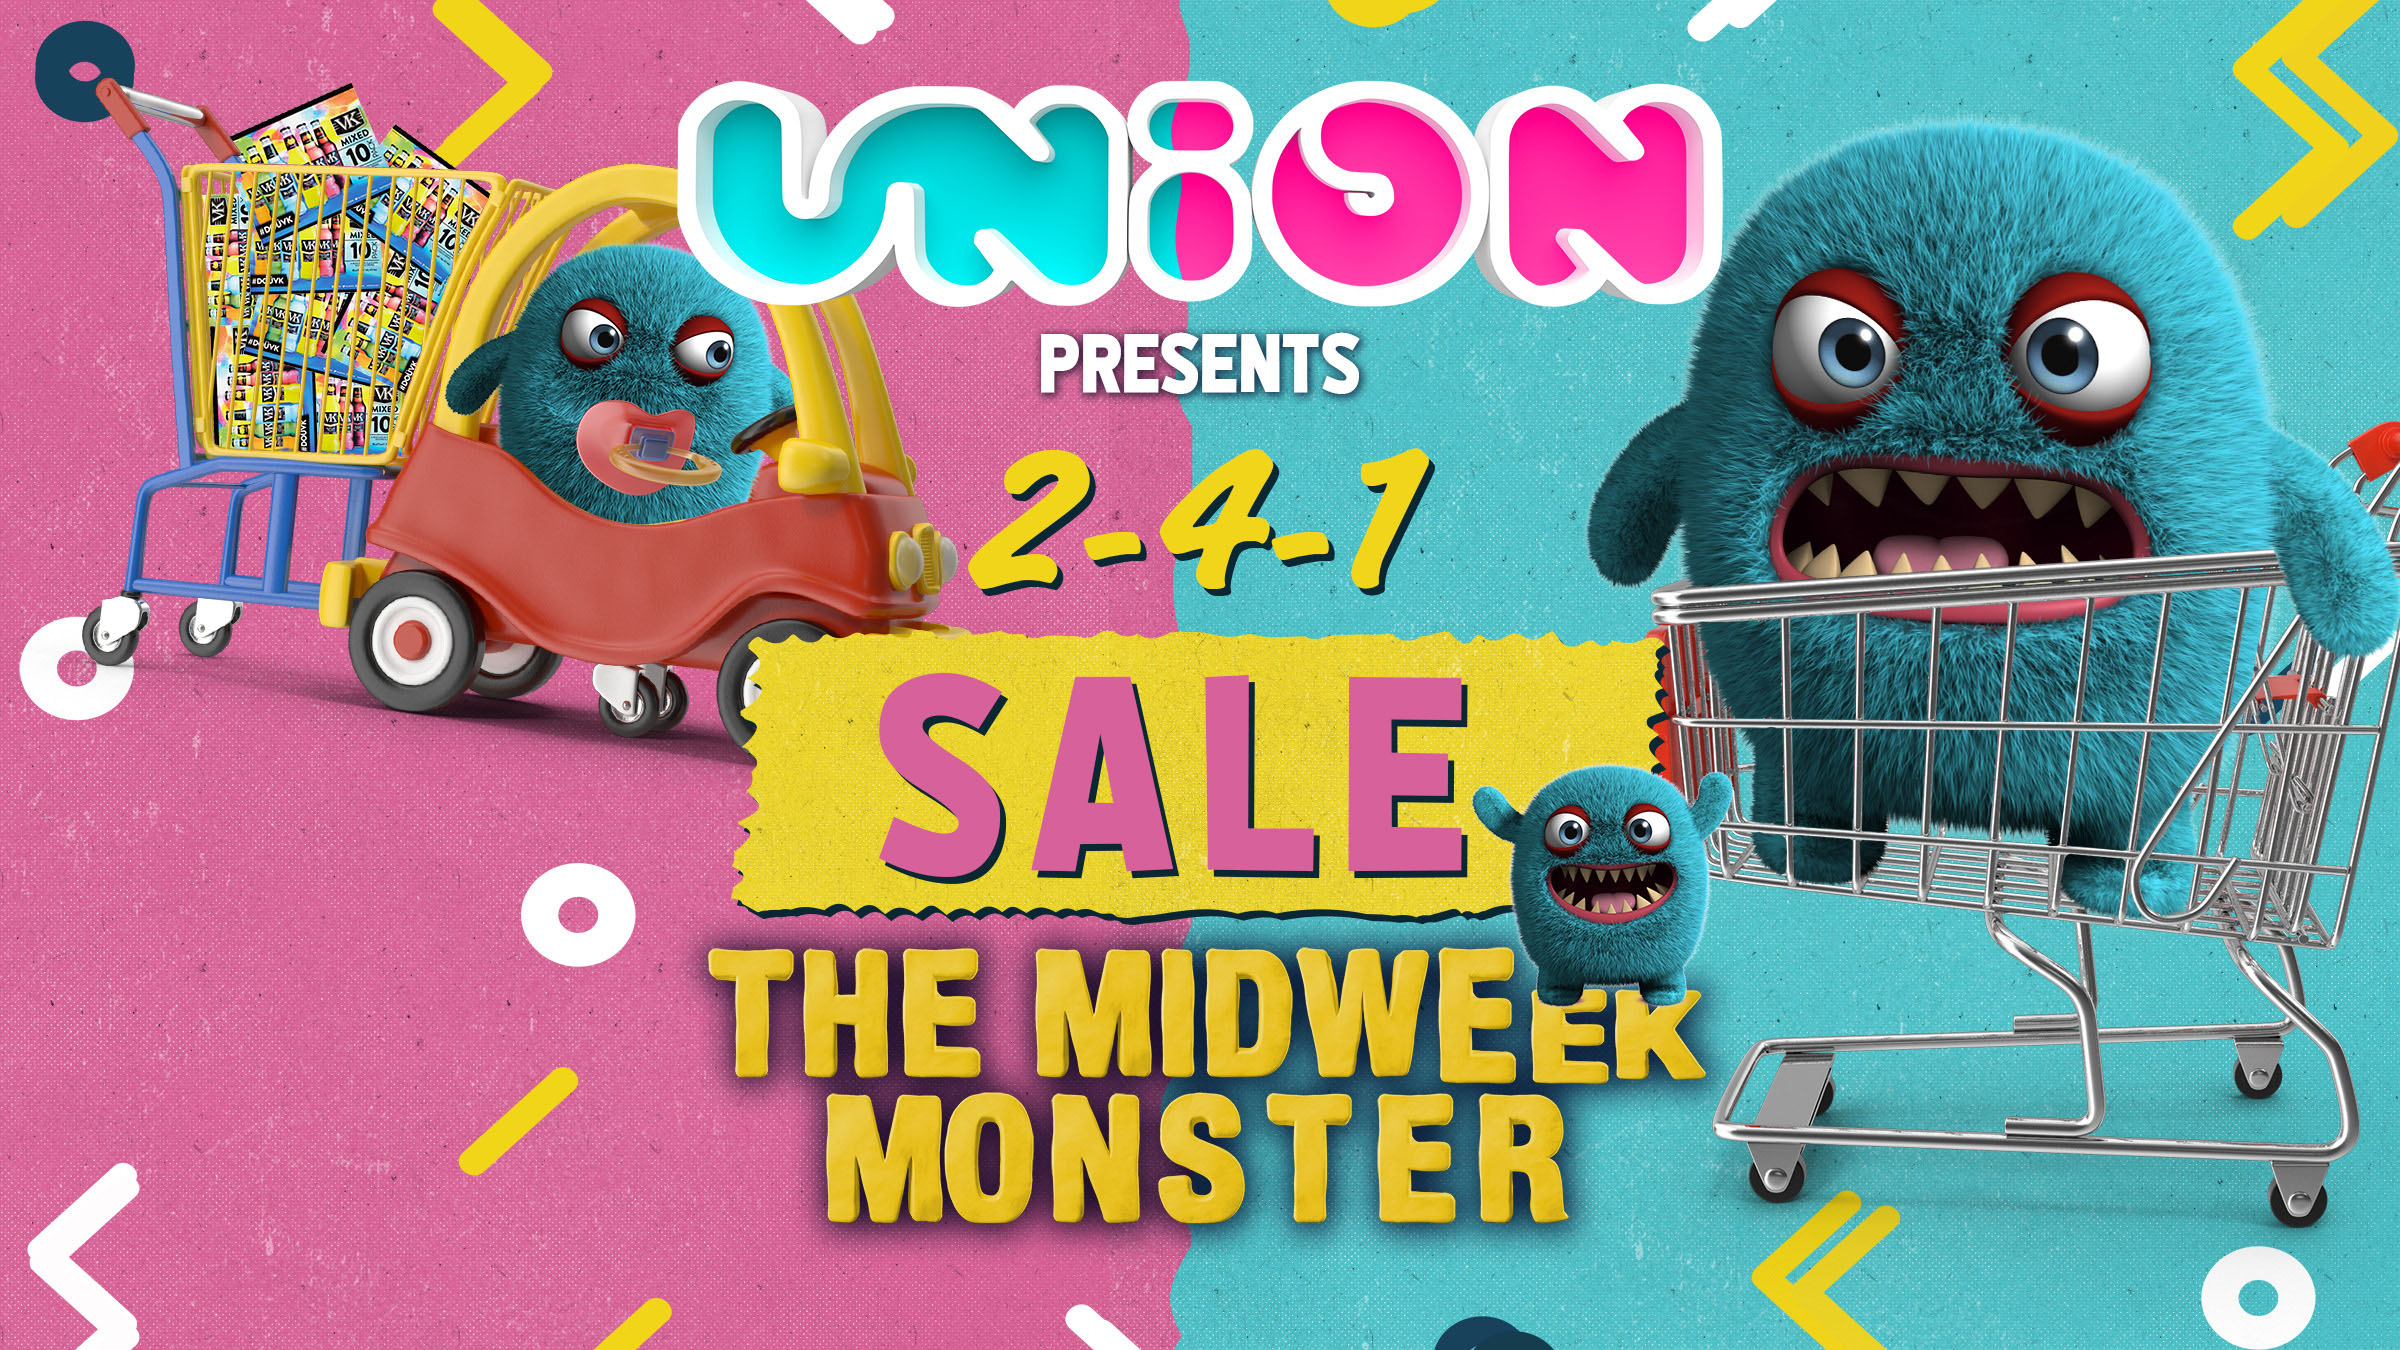 UNION TUESDAY’S PRESENT THE 2-4-1 JANUARY SALE